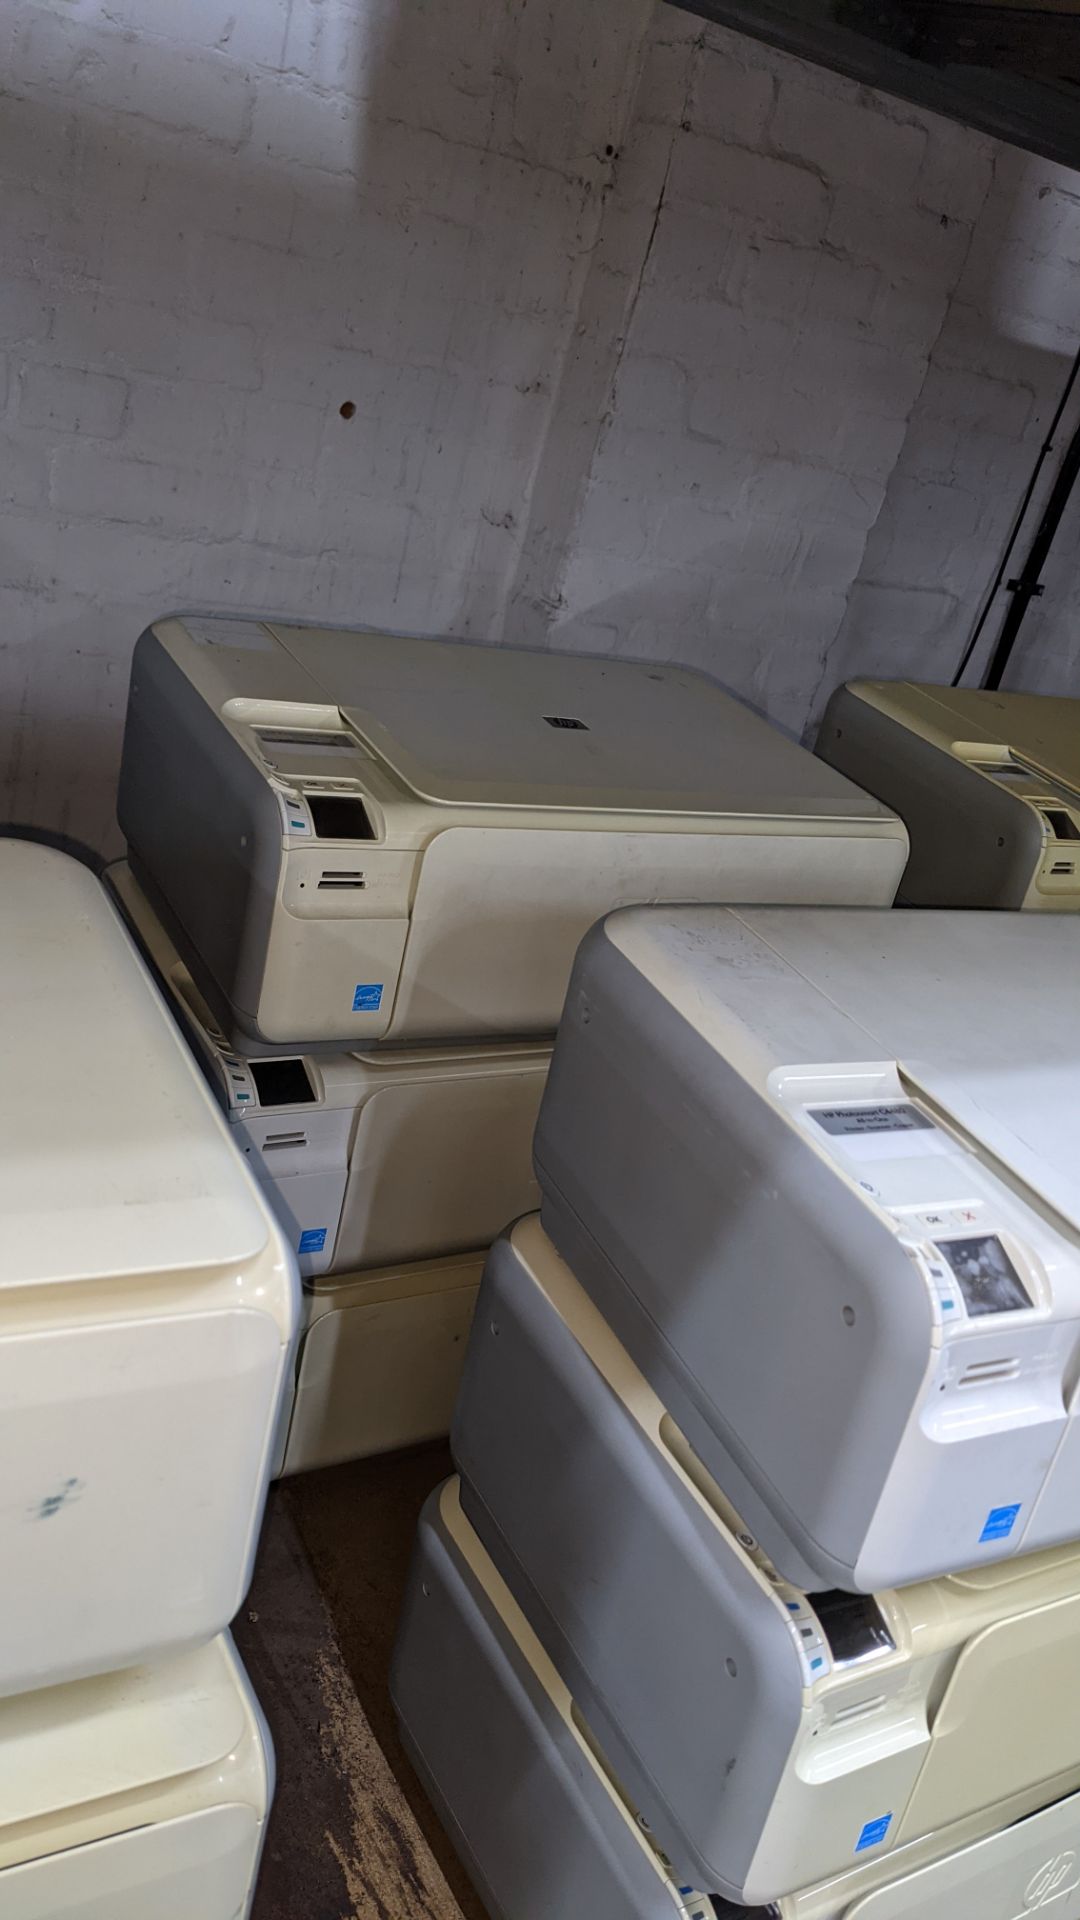 12 off HP Photo Smart C4480 printers NB. No power leads & cables - Image 7 of 8